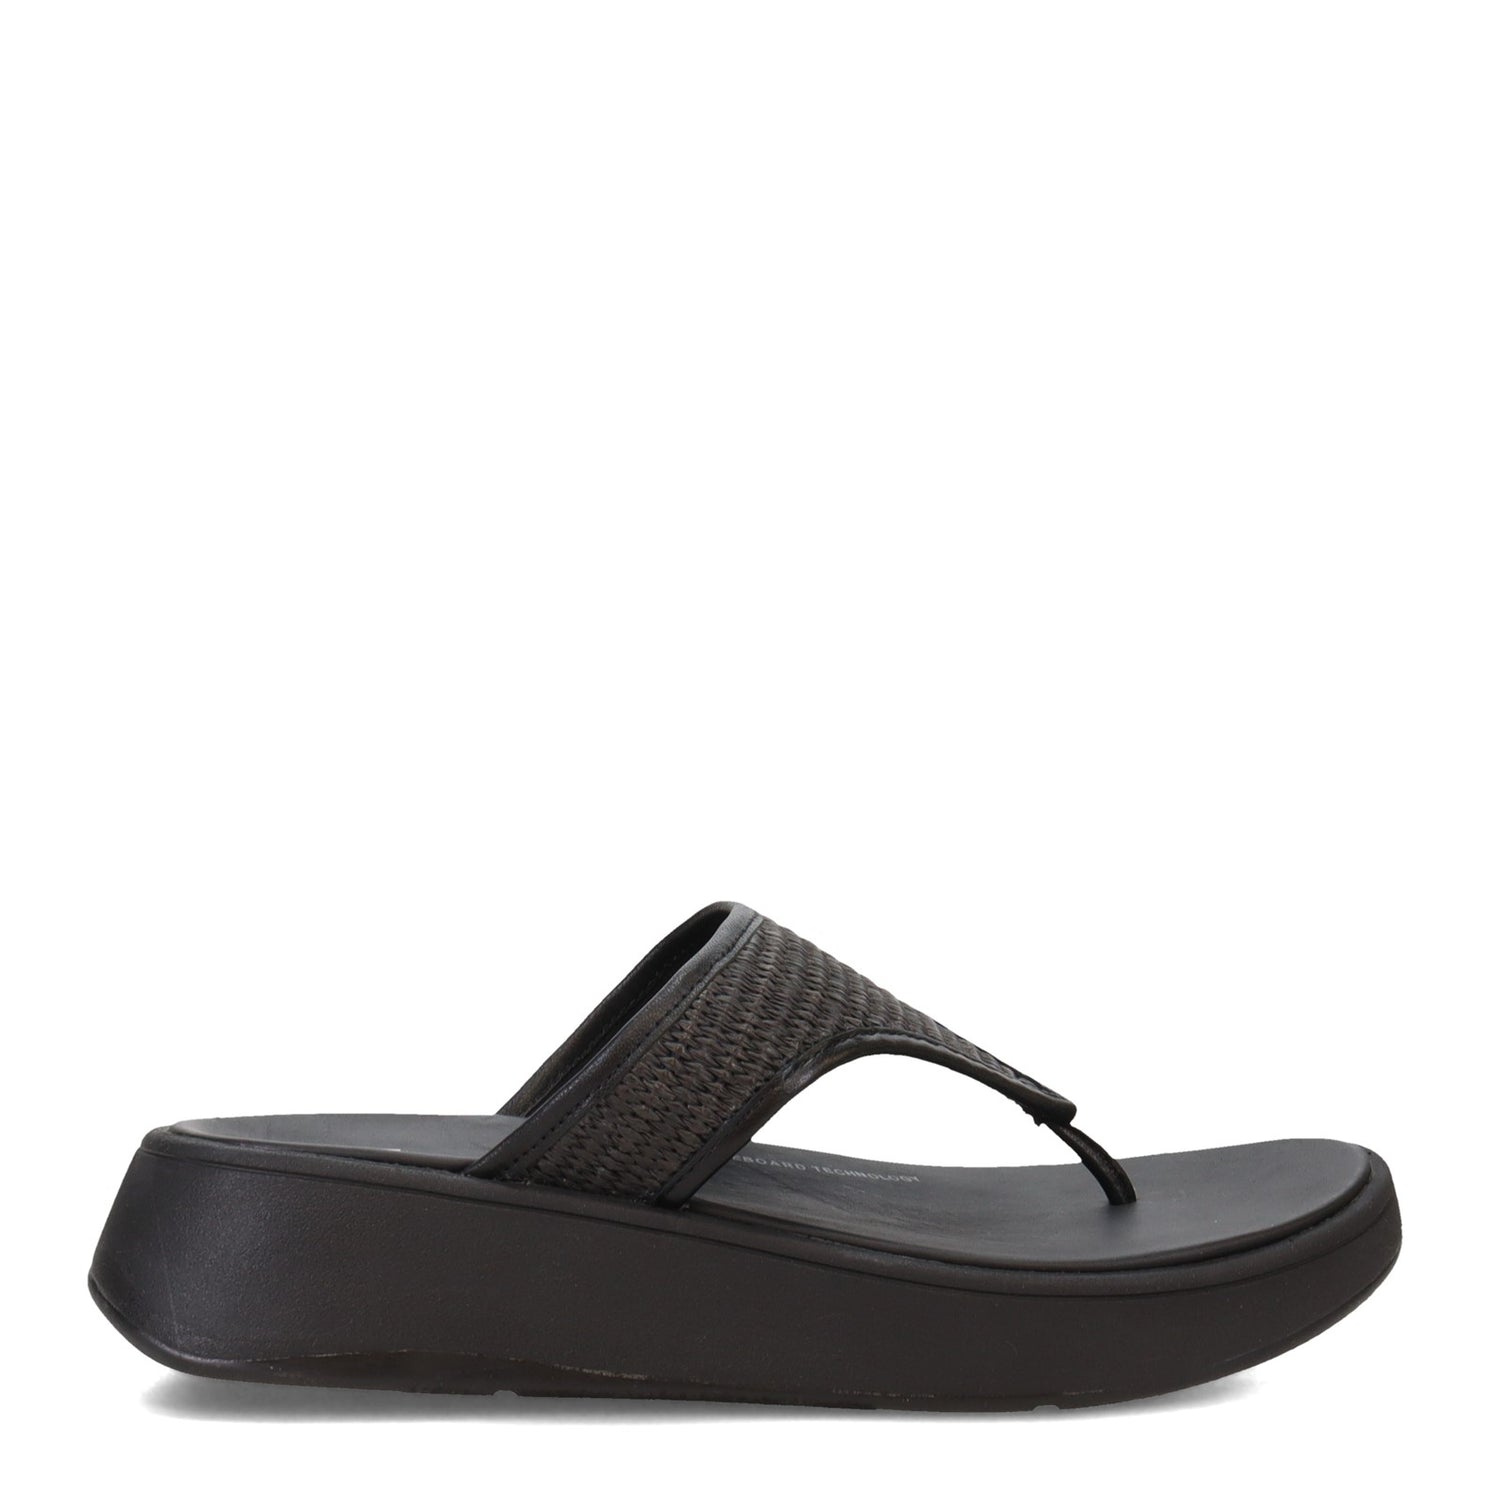  FitFlop™ Women's F-Mode Luxe Leather Flatform Toe-Post Sandal,  All Black, Size 5